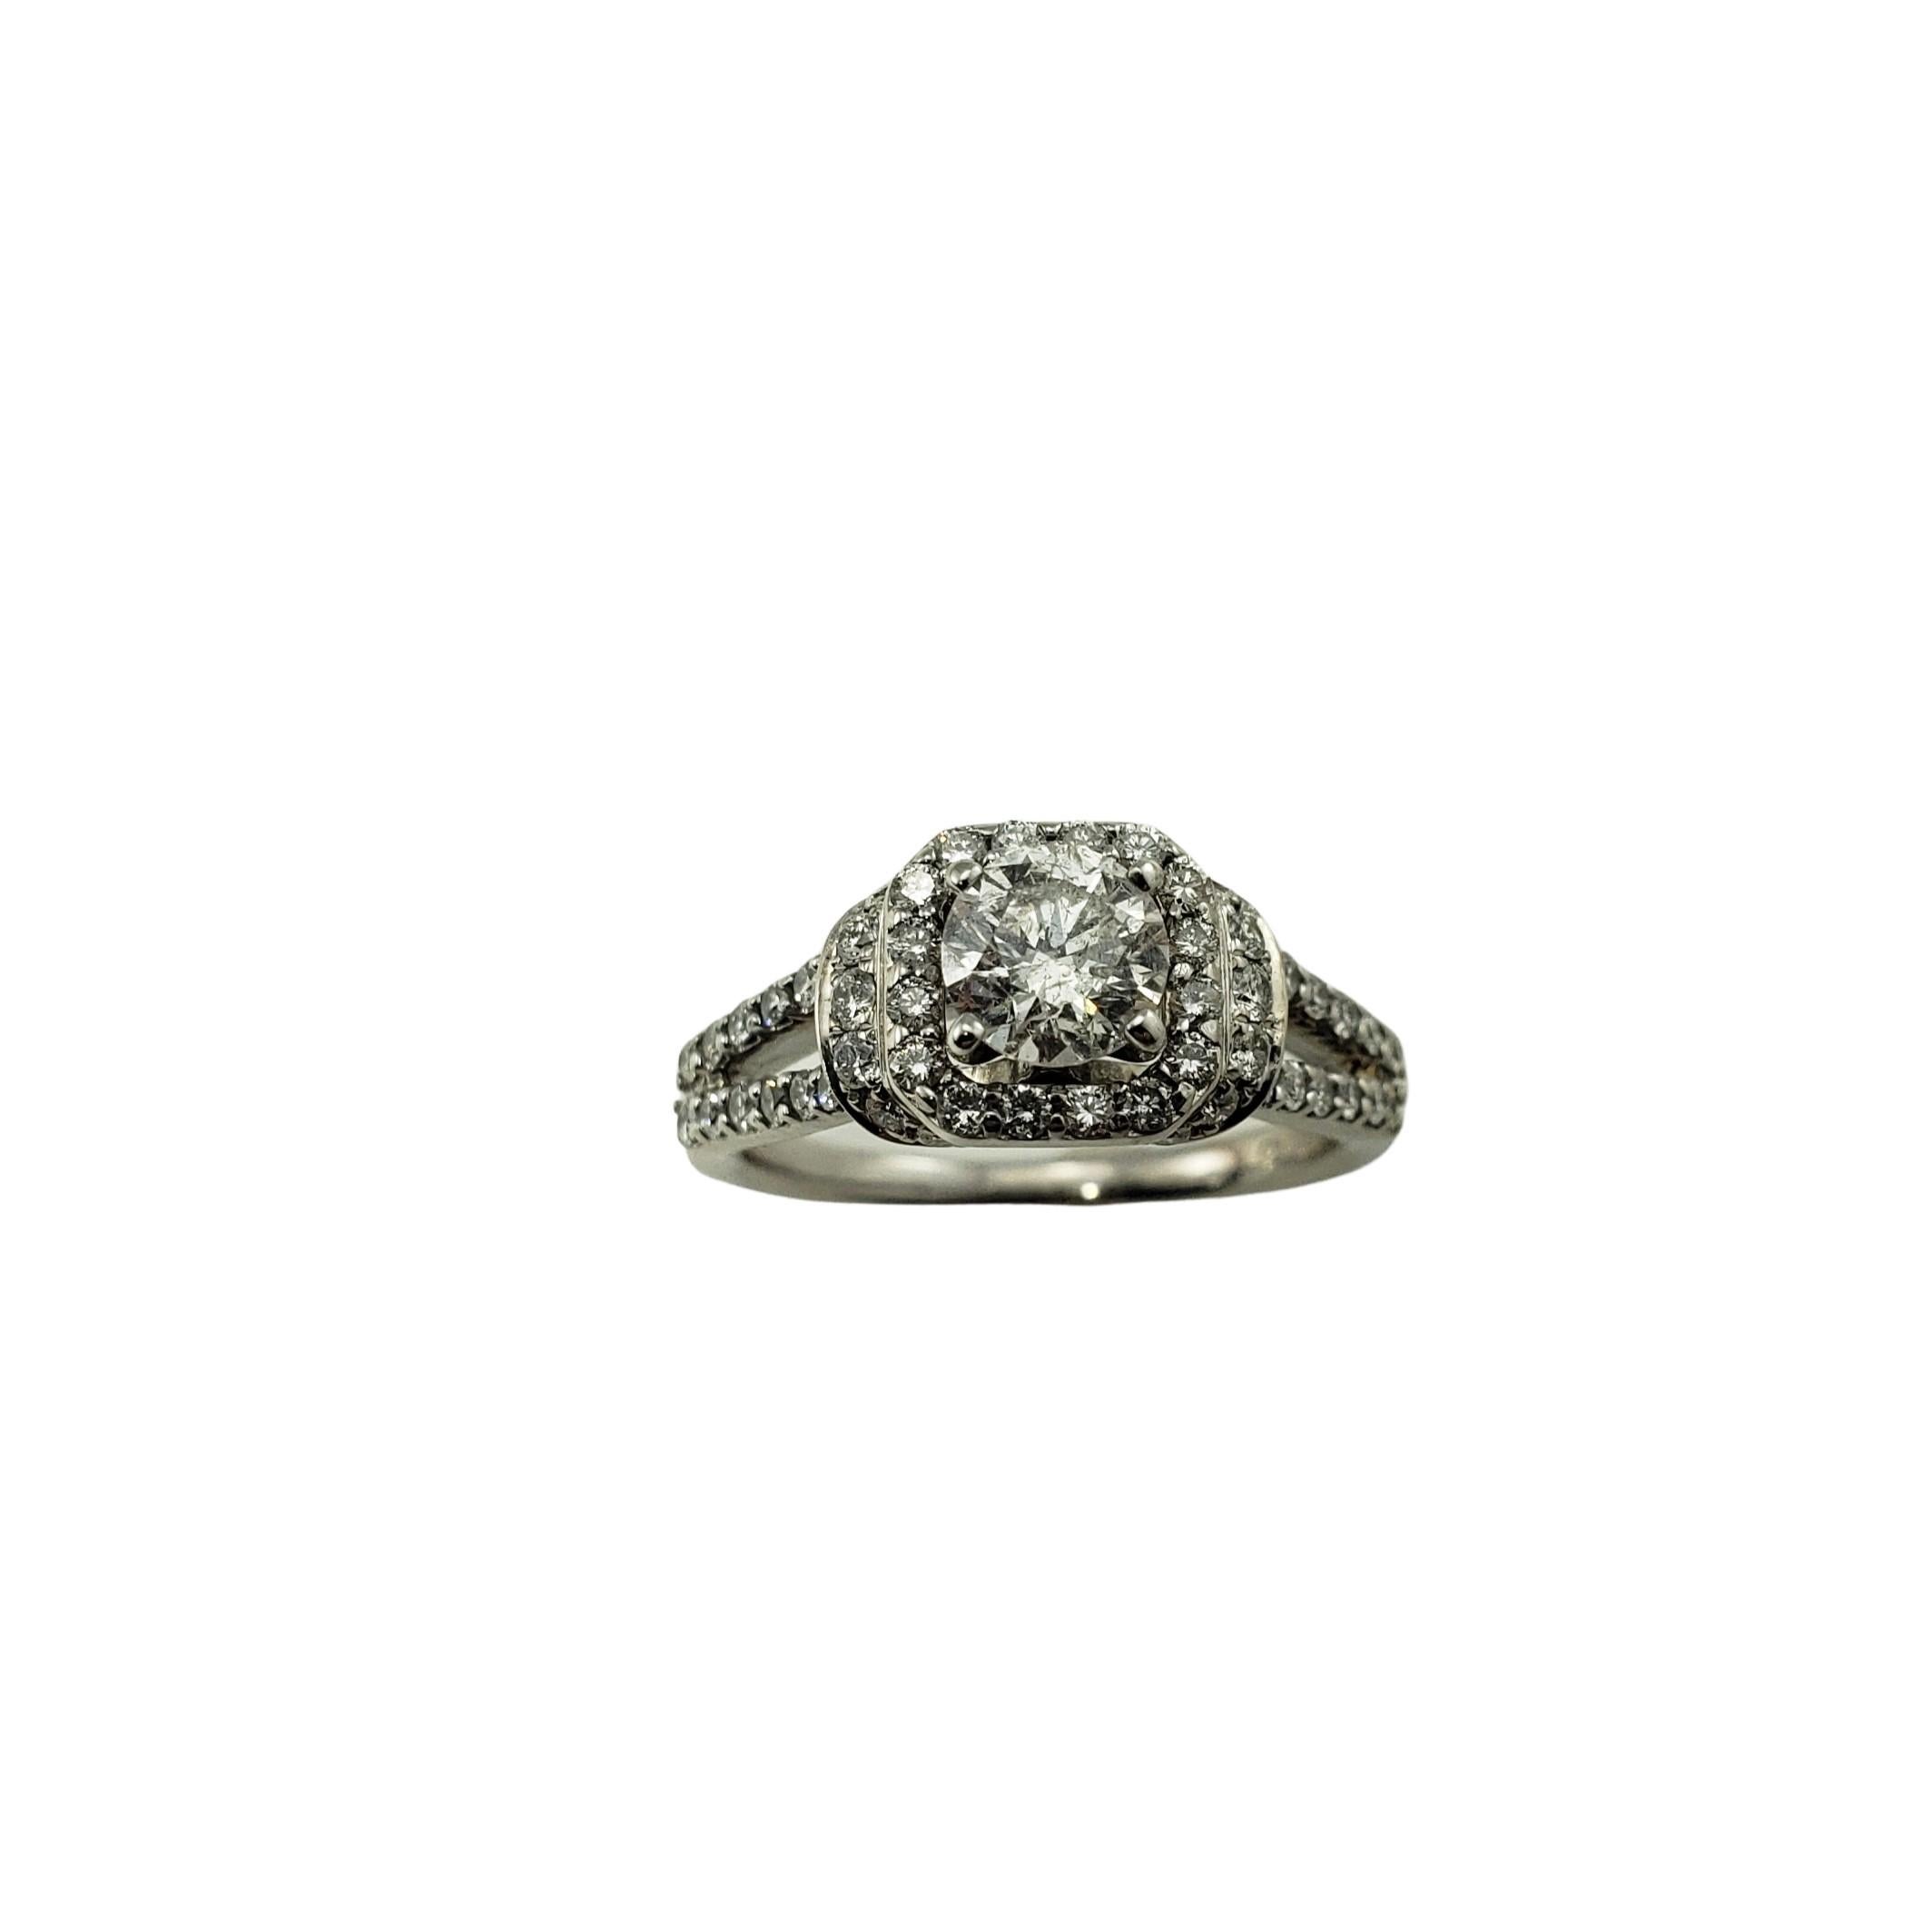 14 Karat White Gold Diamond Engagement Ring Size 6.25 GAI Certified-

This sparkling ring features one round brilliant cut diamond (.70 ct.) surrounded by 60 round brilliant cut diamonds on the halo and band.  Shank:  1.5 mm.

Approximate total